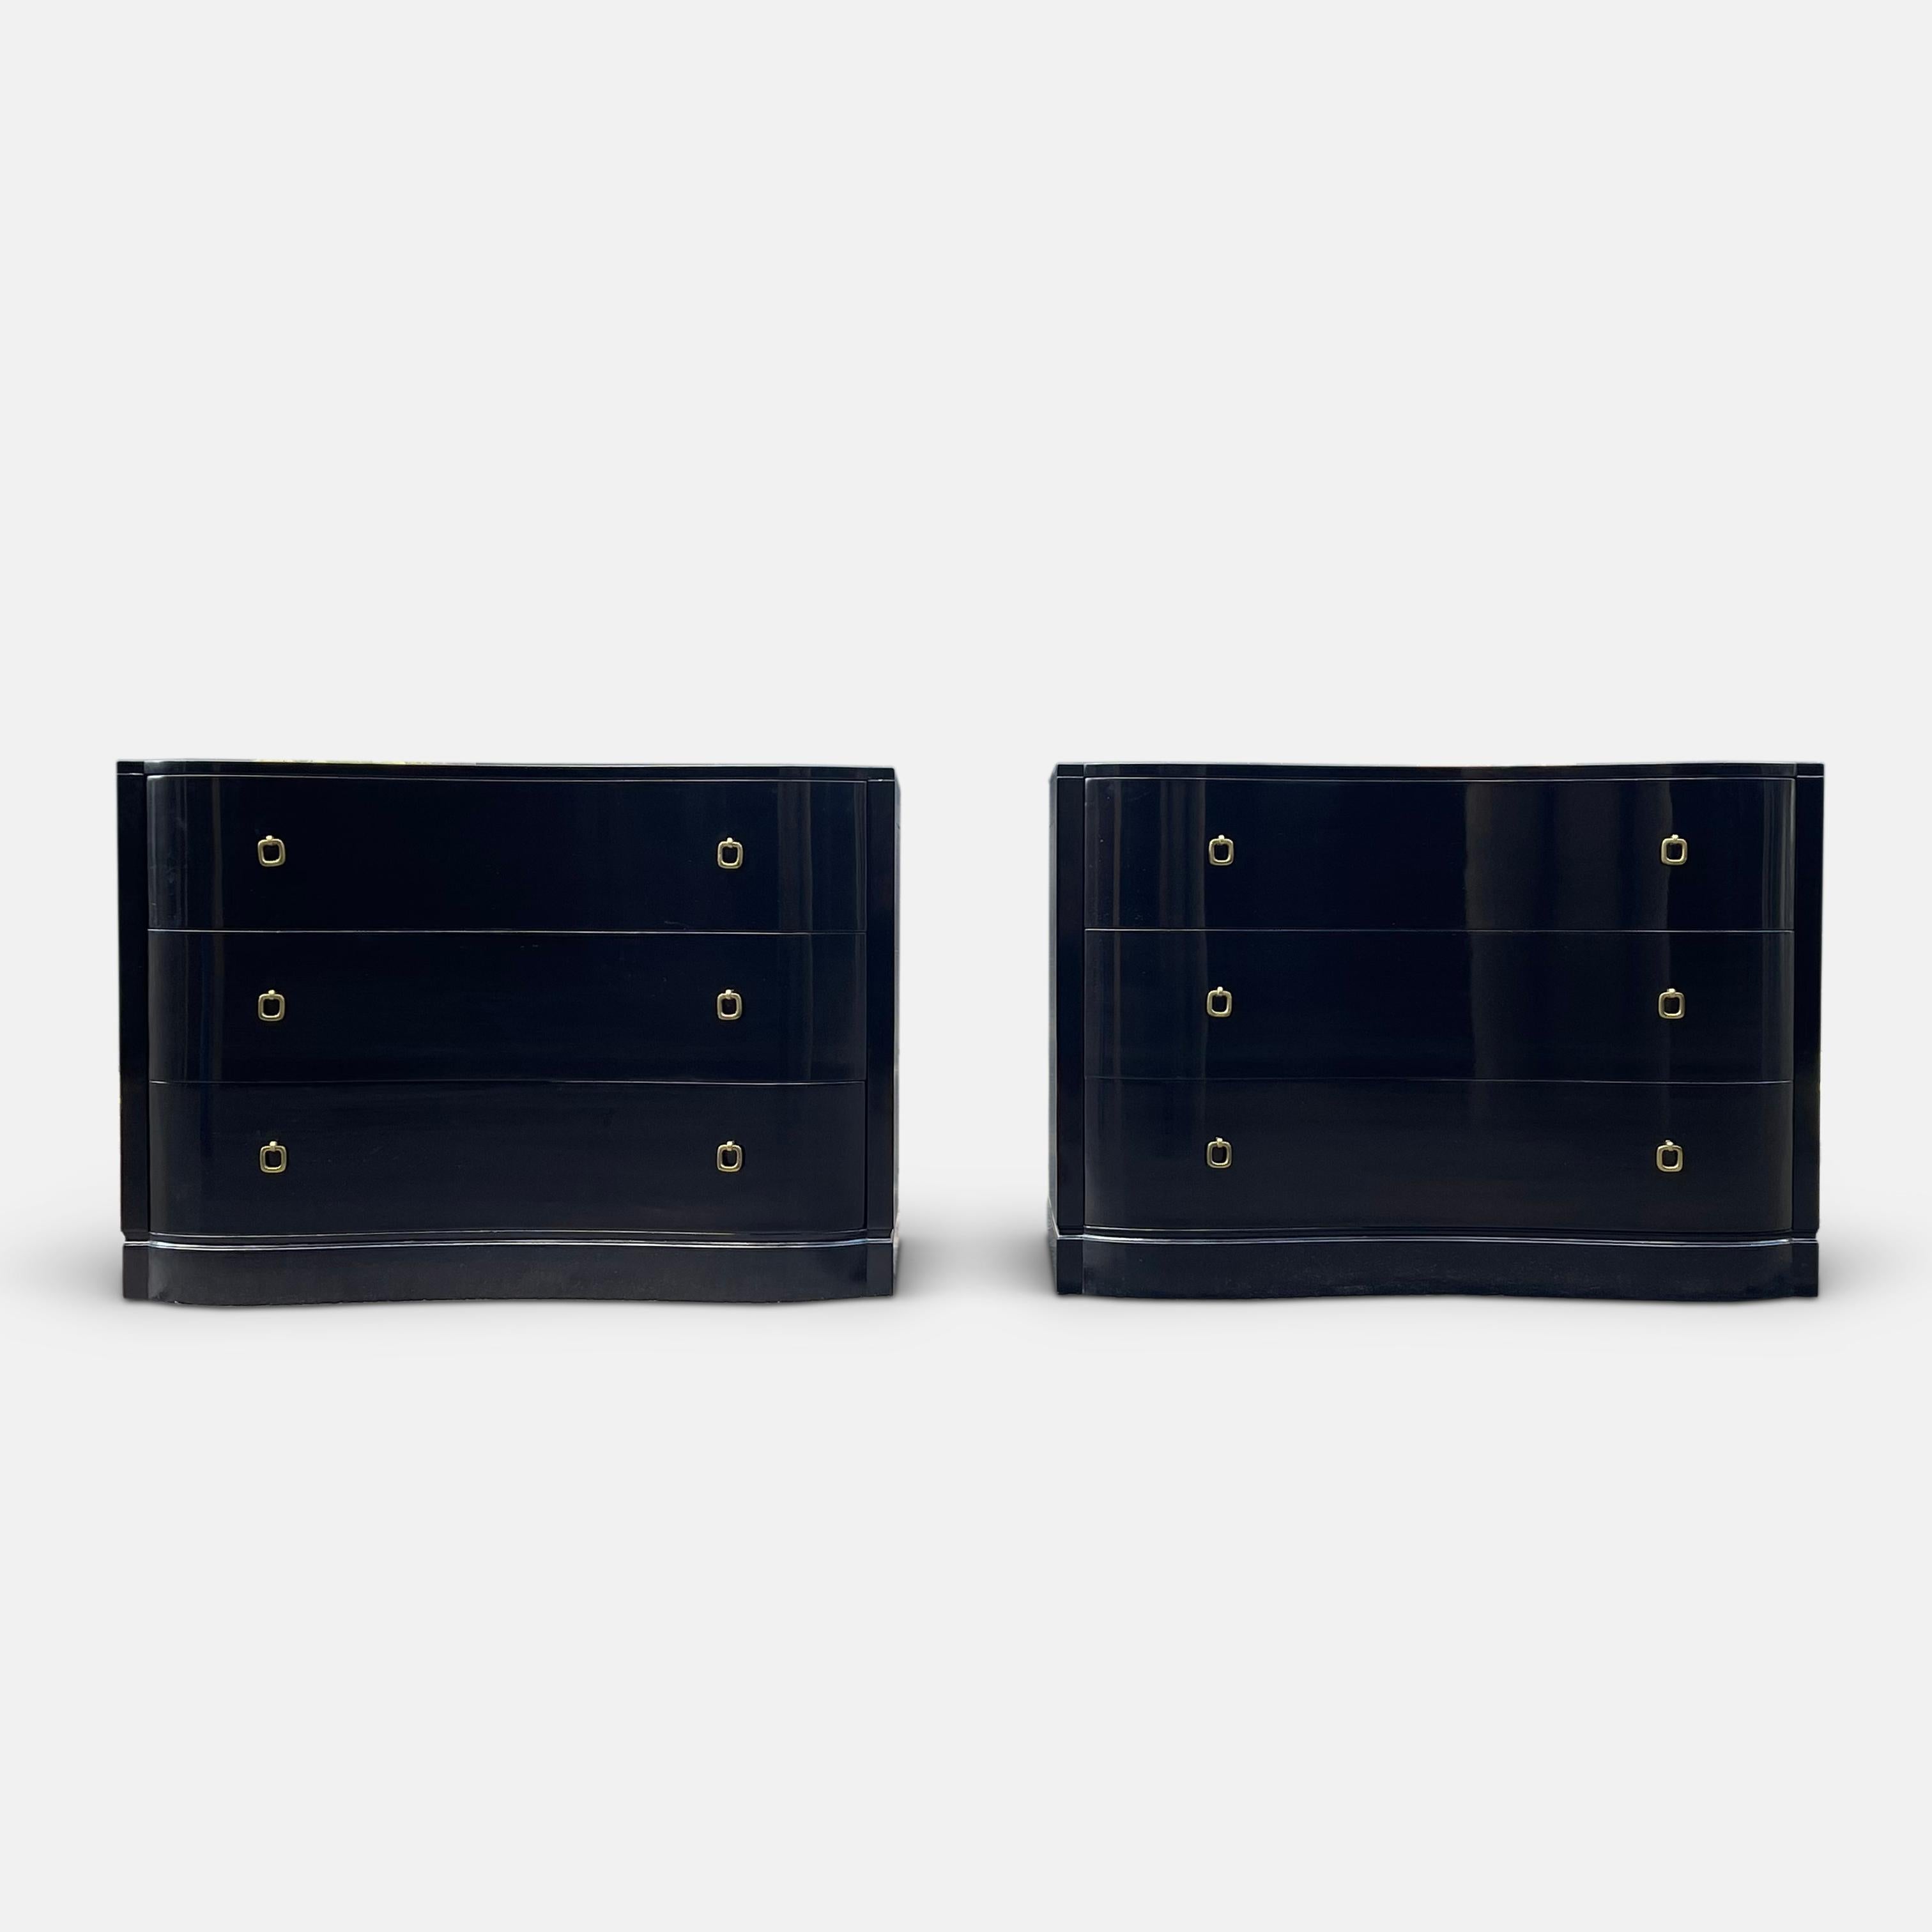 These two beautiful chests in black lacquer were made by the designer Lorin Jackson in the 1940s for the celebrated New York furniture company Grosfeld House, whose metal plaque can be seen inside the drawers.
Serving as a wonderful reminder that